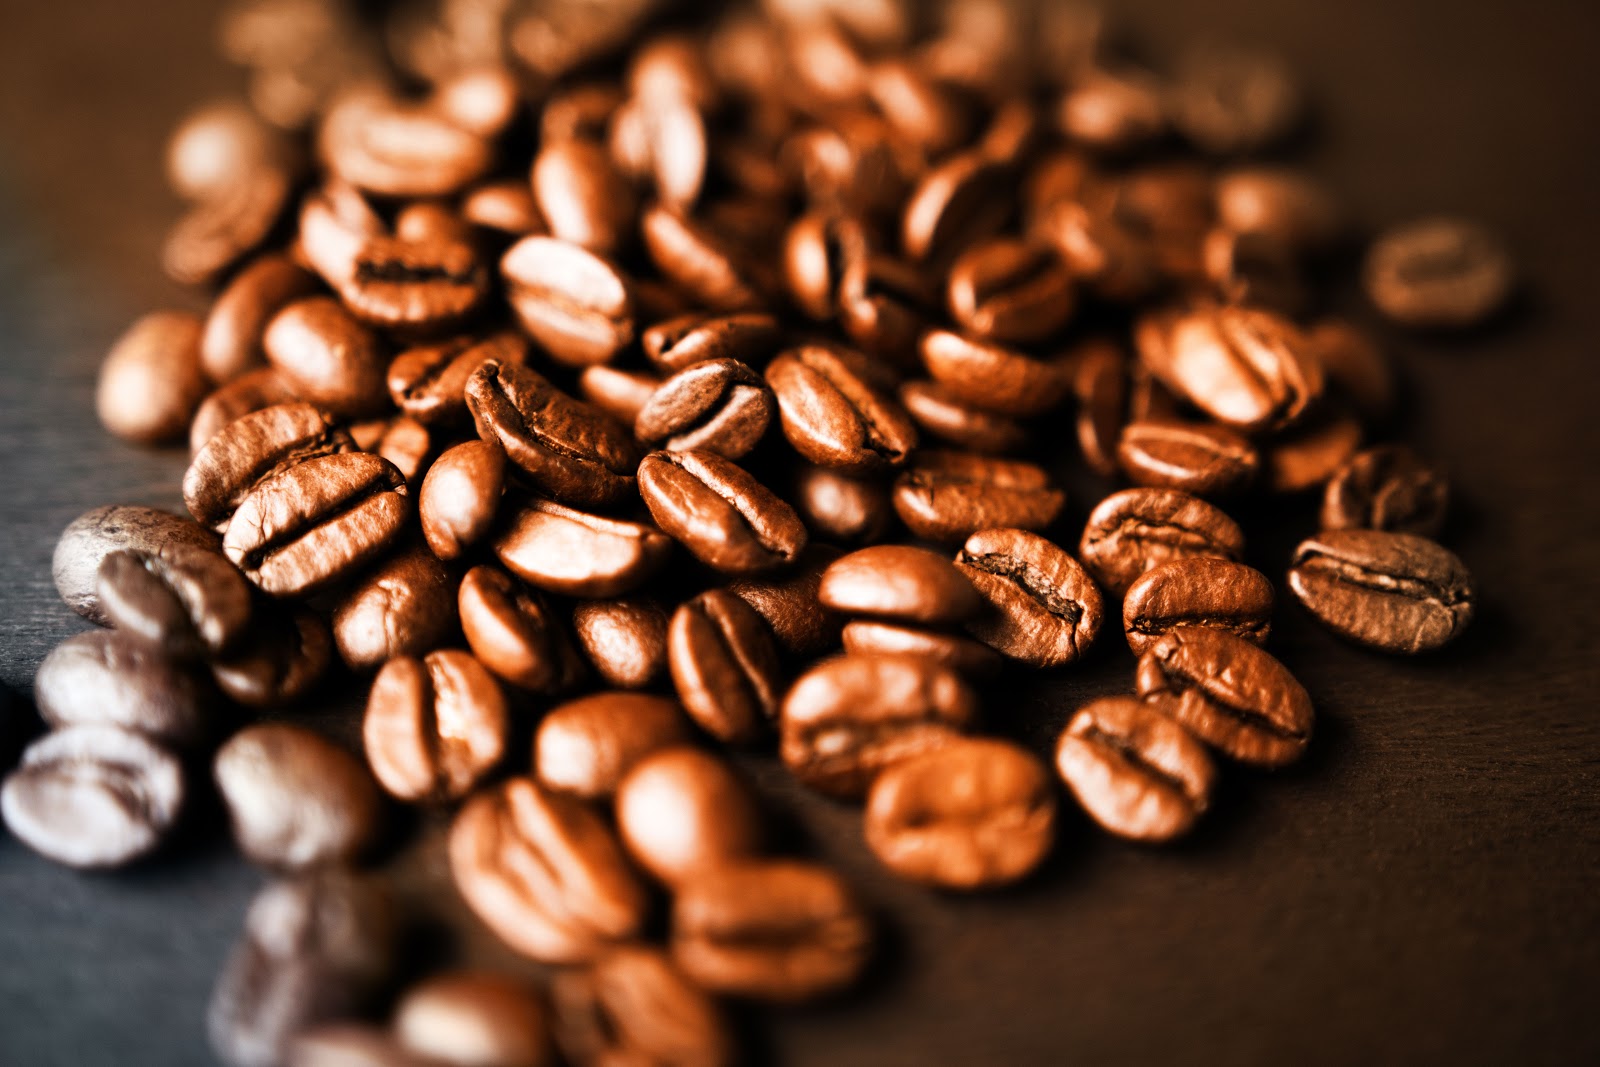 5 Health Reasons You Should Drink More Coffee